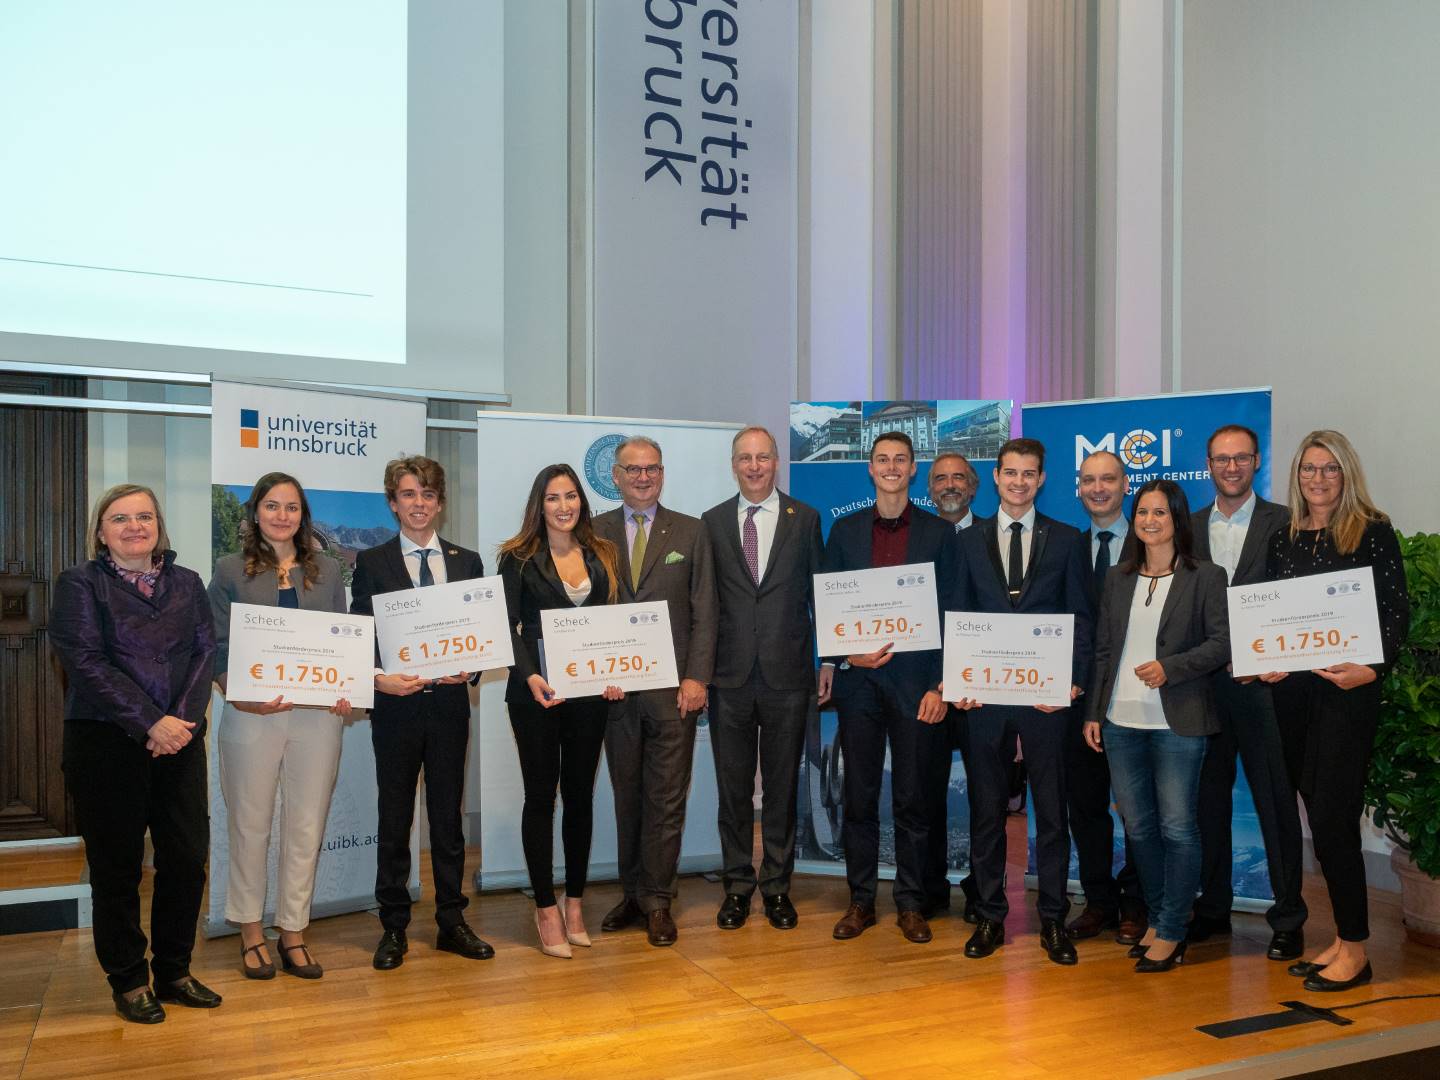 DFK Chairman Yorck Schmidt (center) presented the prizes and congratulated the students The MCI winners are: Simon Bauer, Maximilian Nißlein, Thomas Steidl. Photo: UIBK